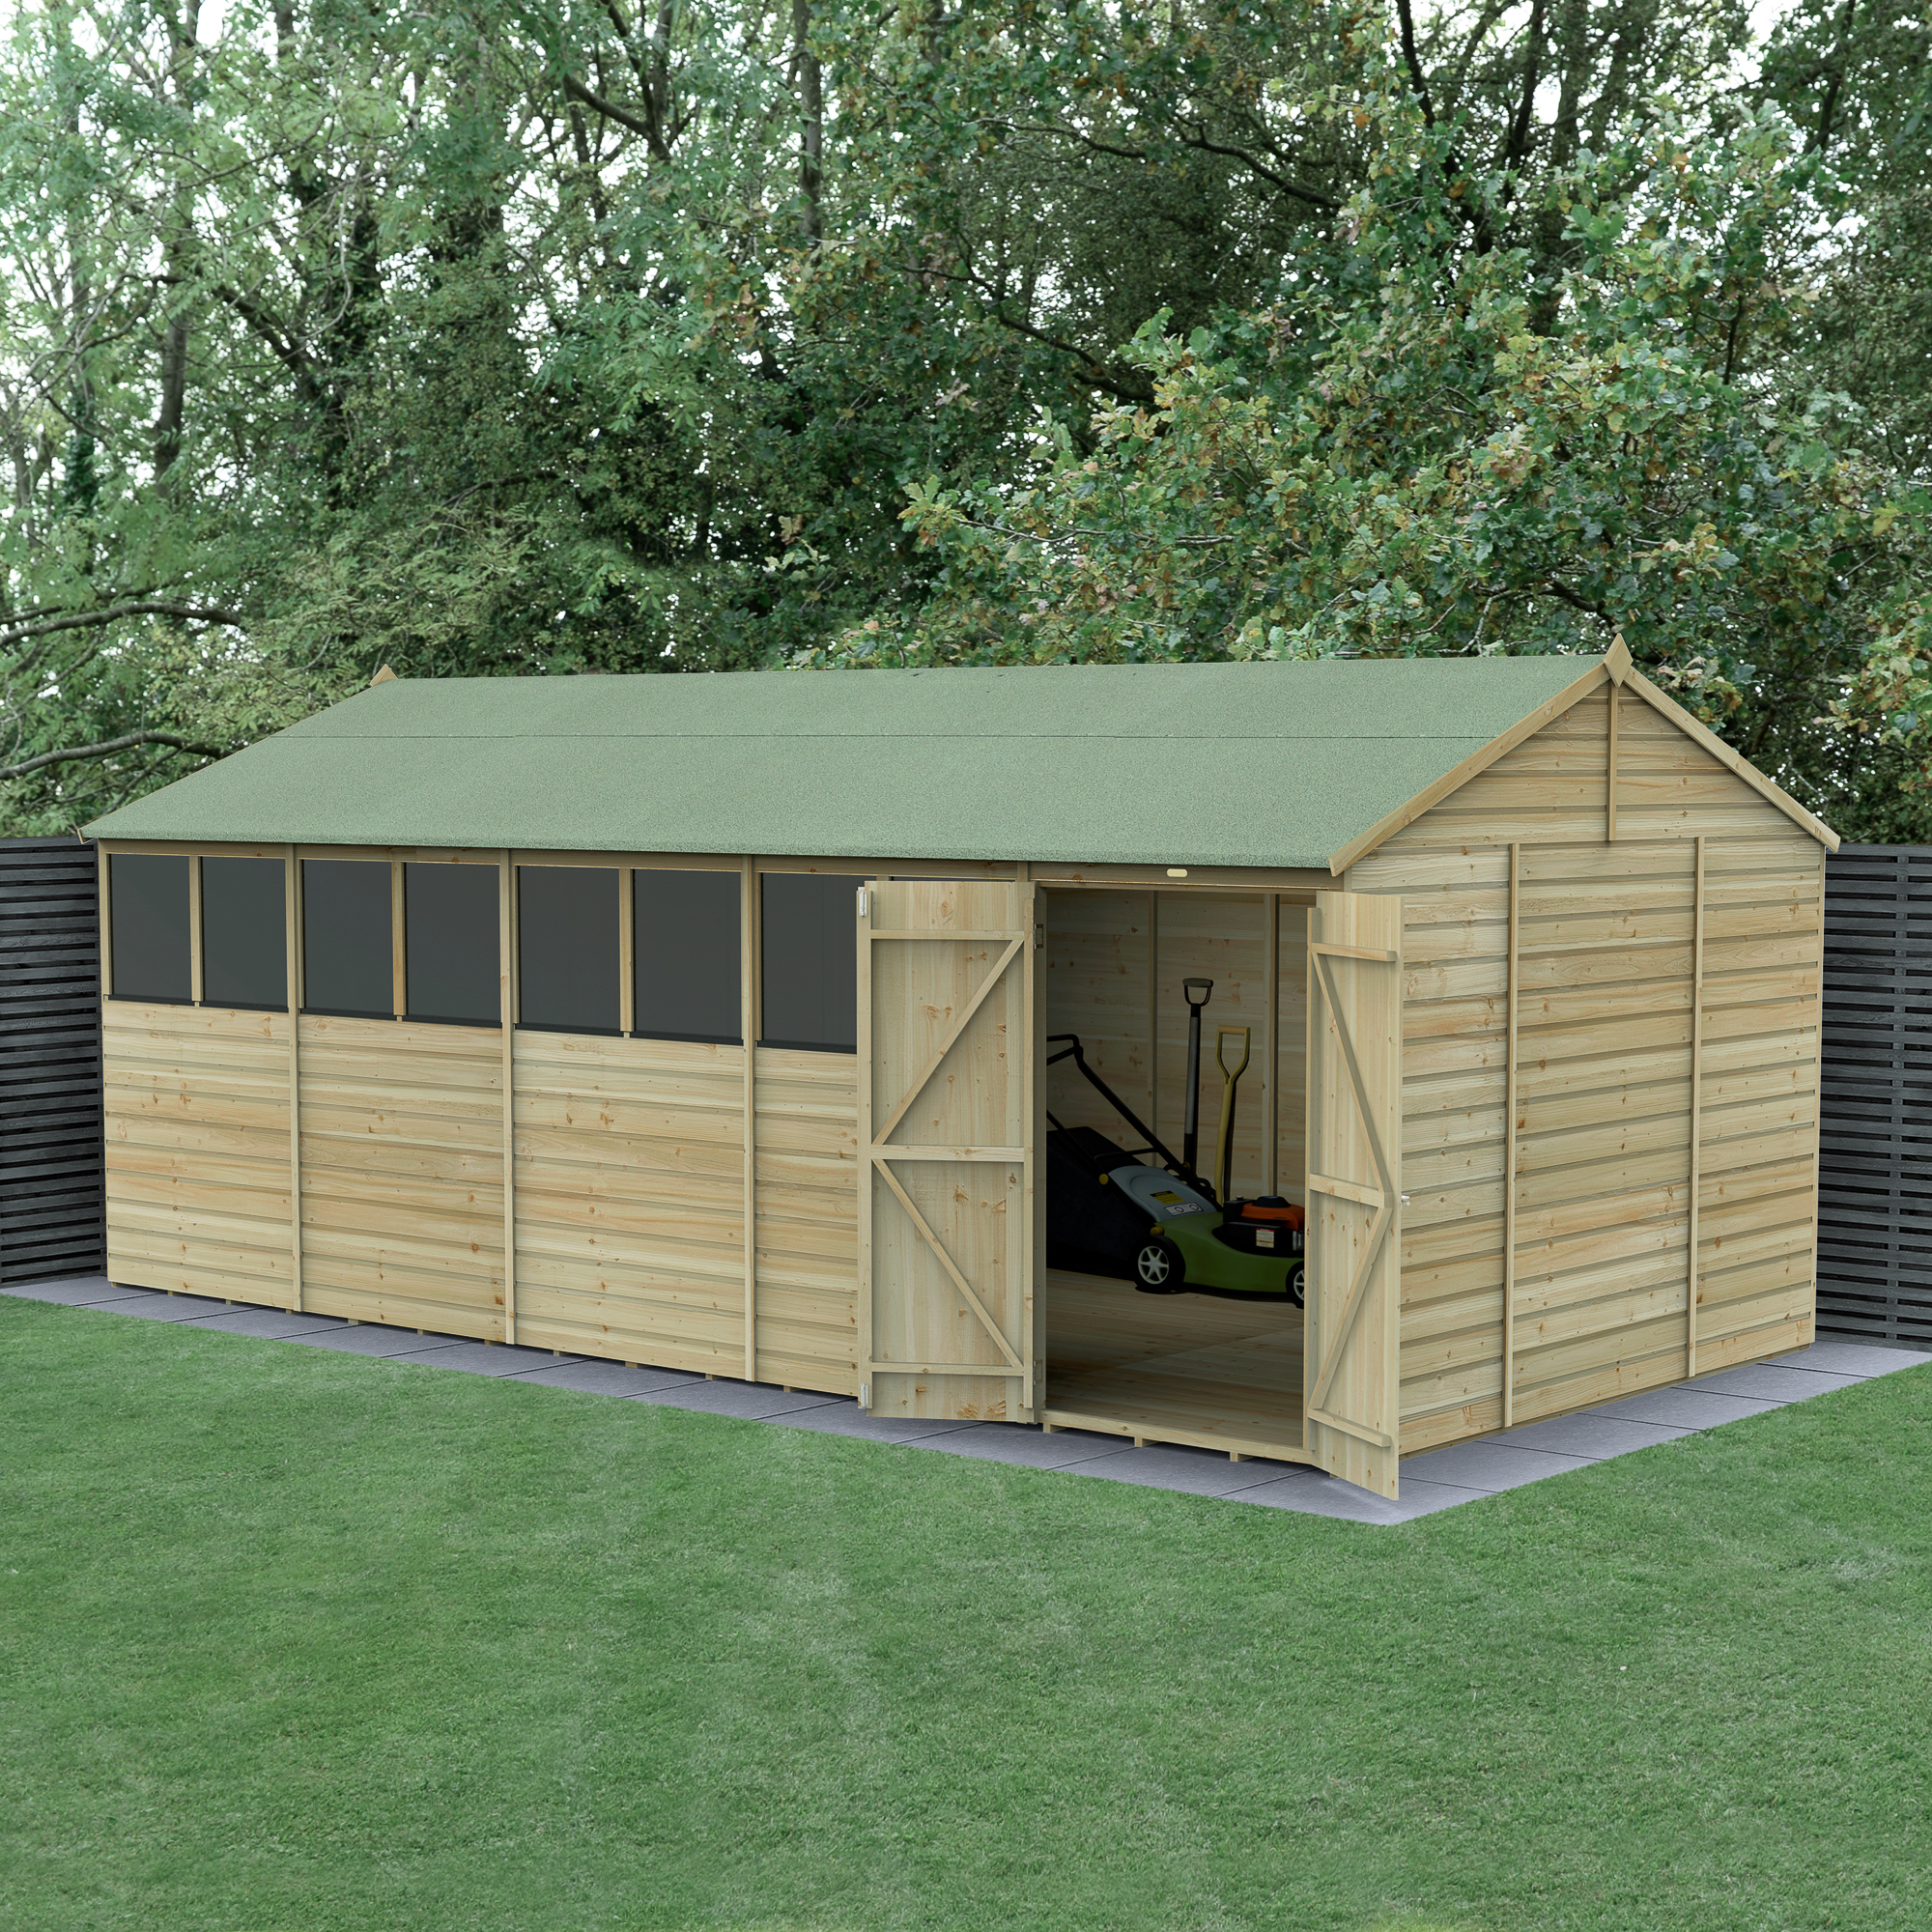 Forest Garden Beckwood 20 x 10ft Reverse Apex Shiplap Pressure Treated Double Door Shed